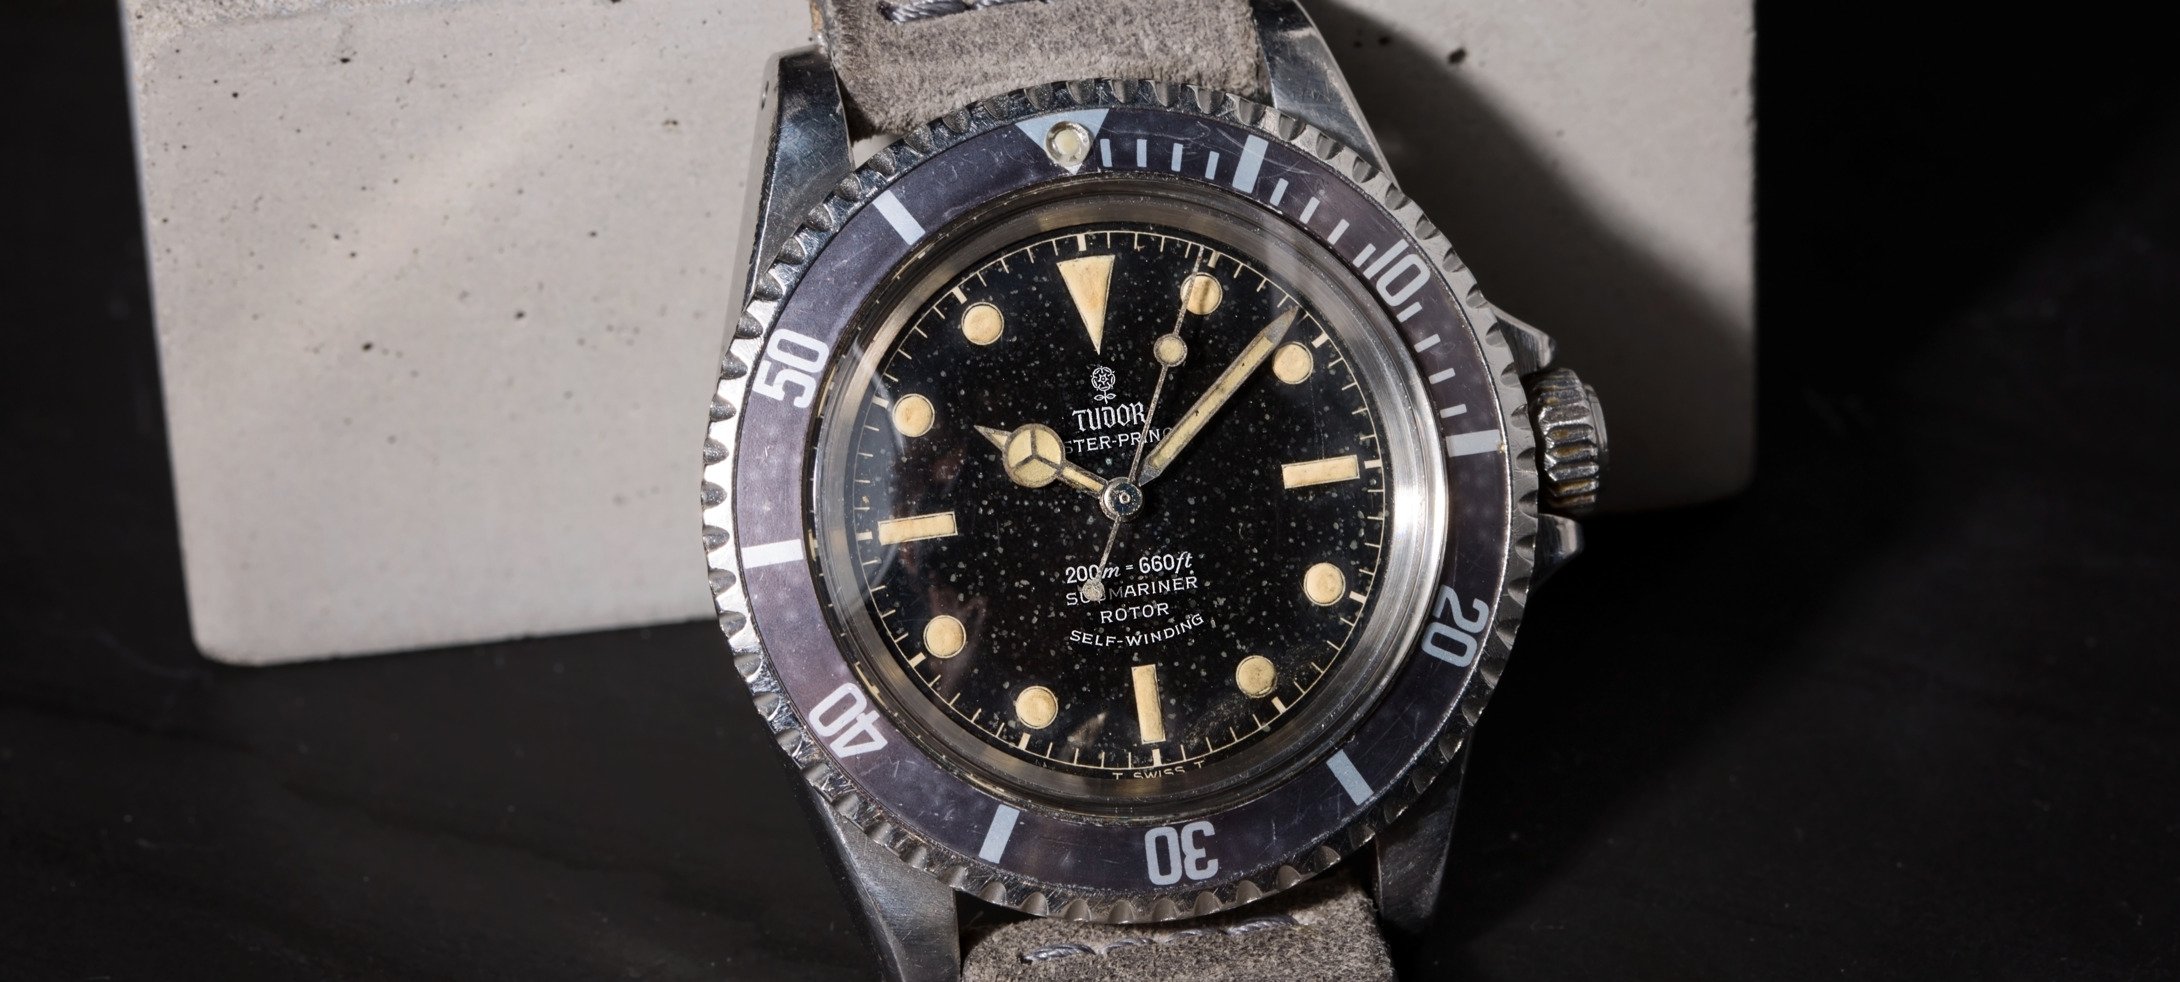 Top Vintage Tudor Watches To Add to Your Growing Collection